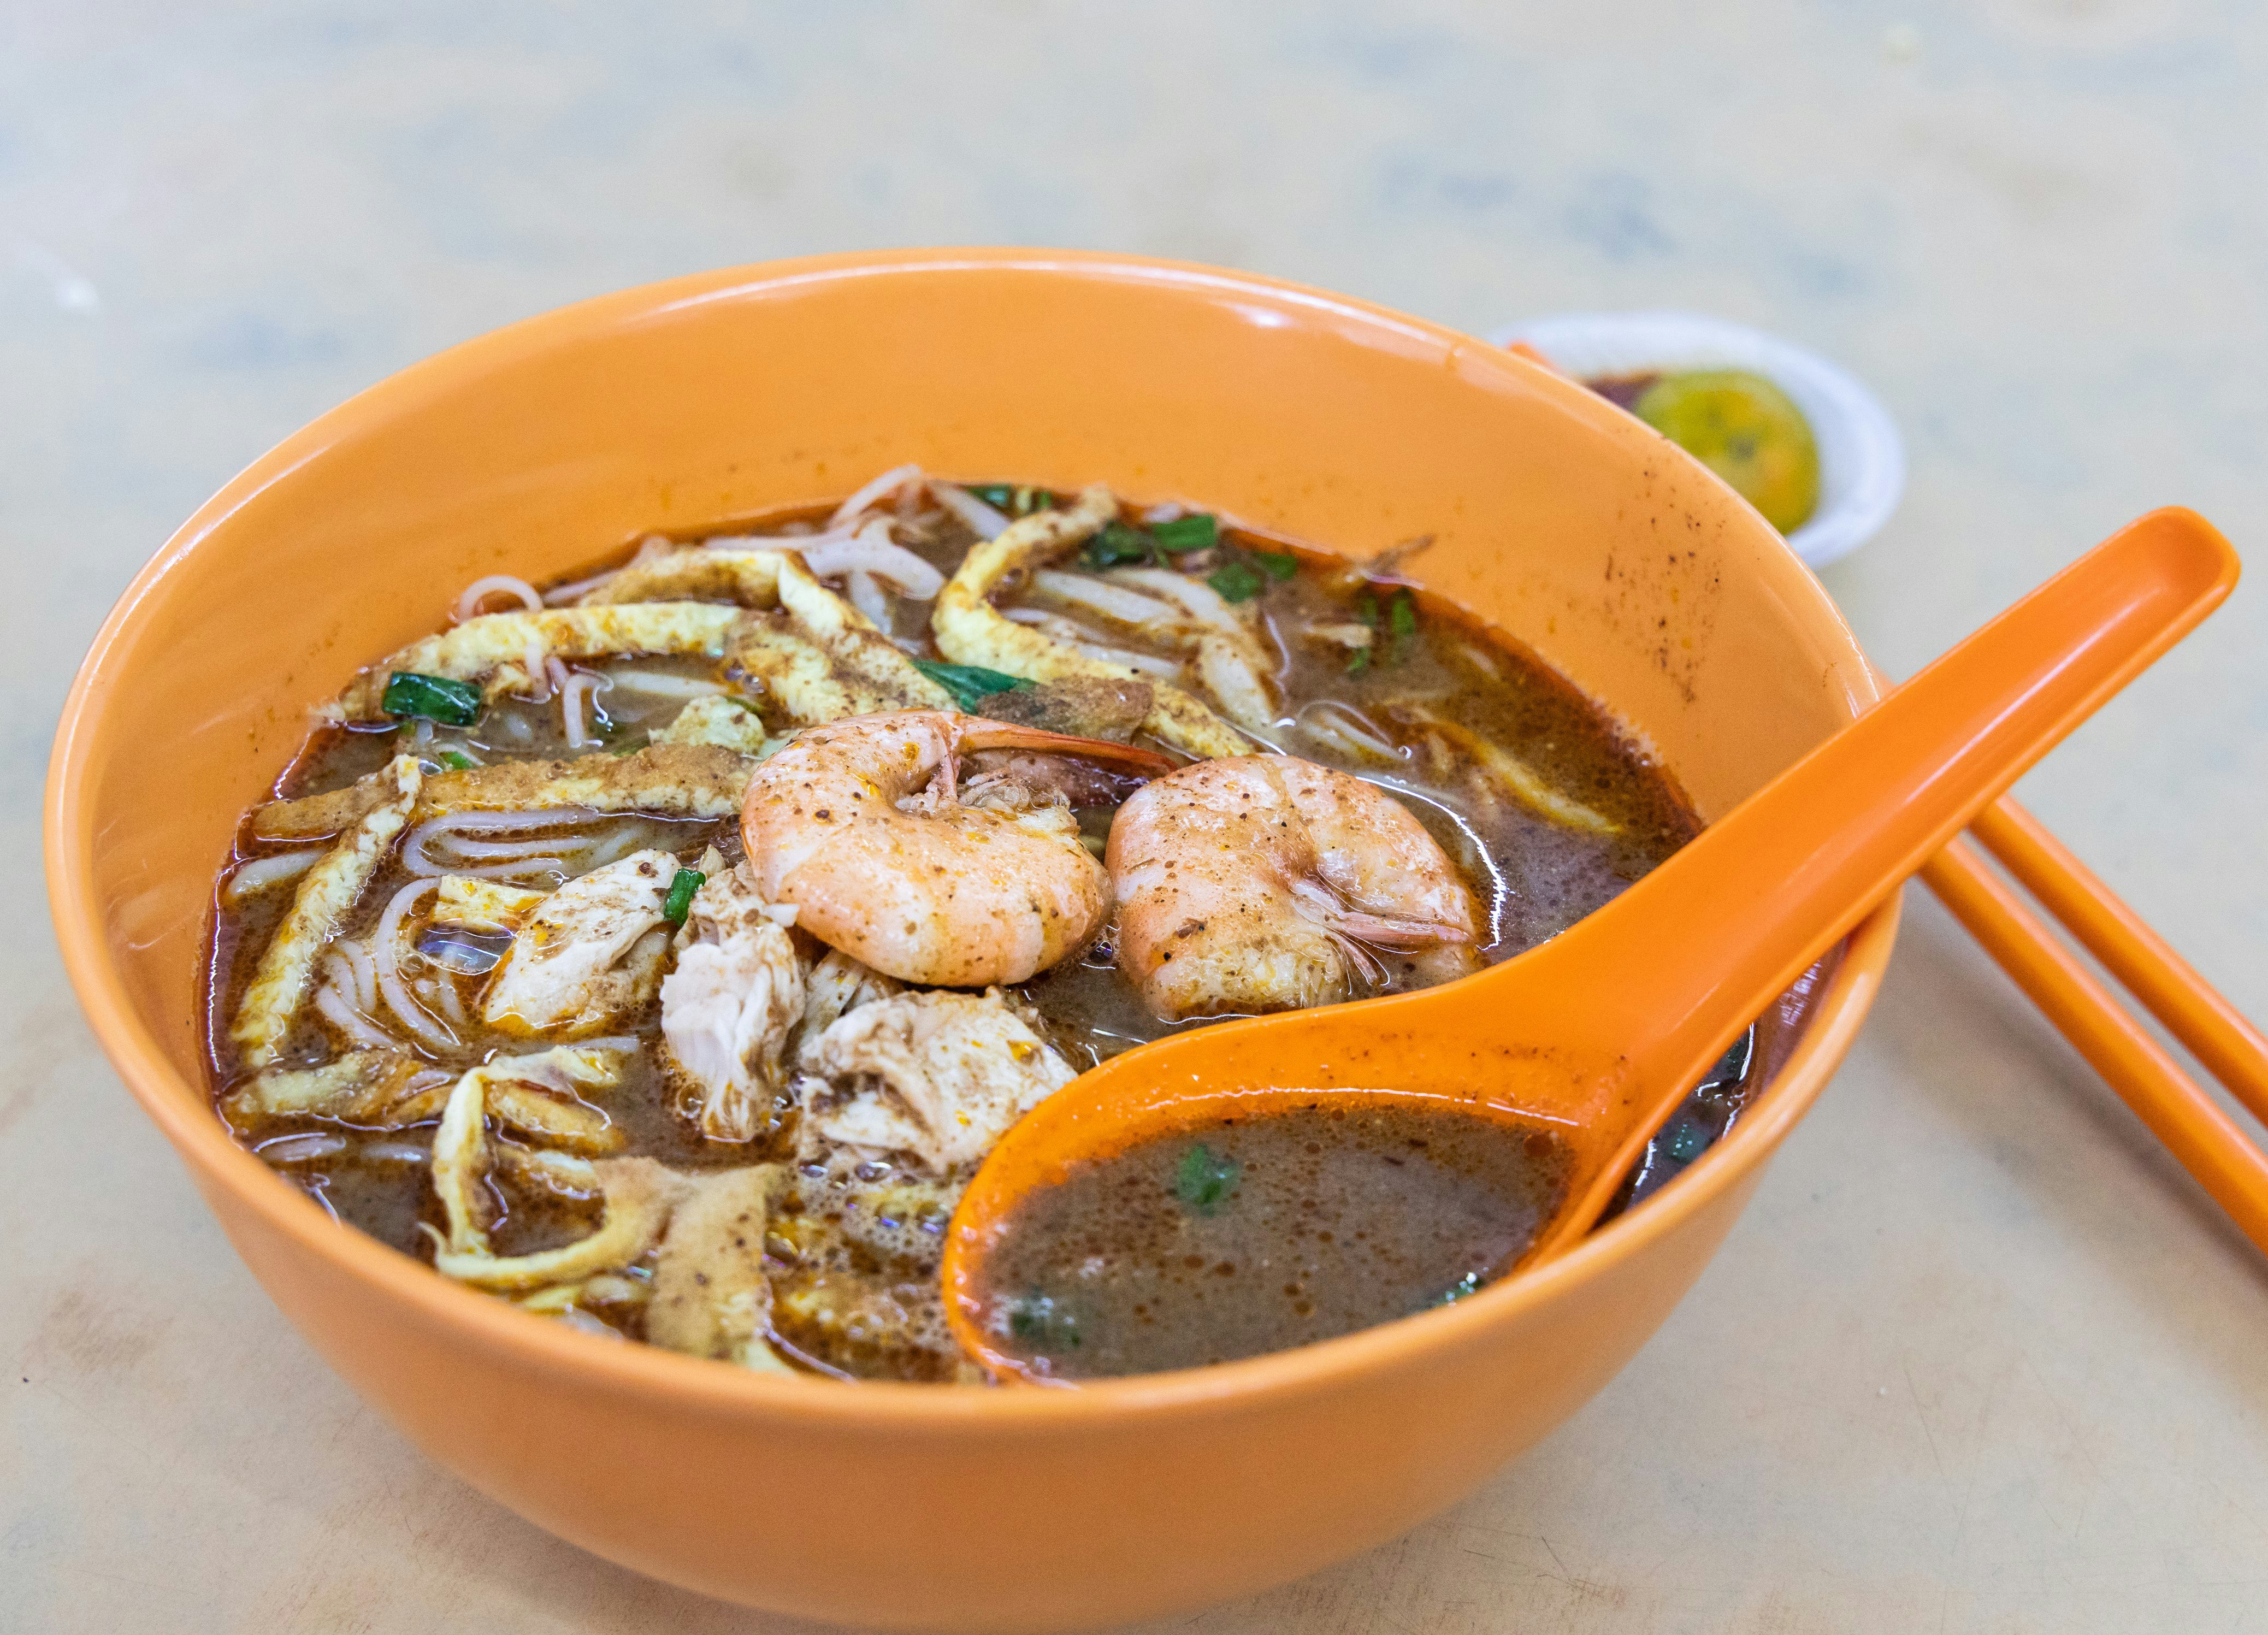 A close-up shot of Sarawak laksa in an orange bowl. The bowl is filled with a dark broth in which noodles, prawns and pieces of chicken are floating.